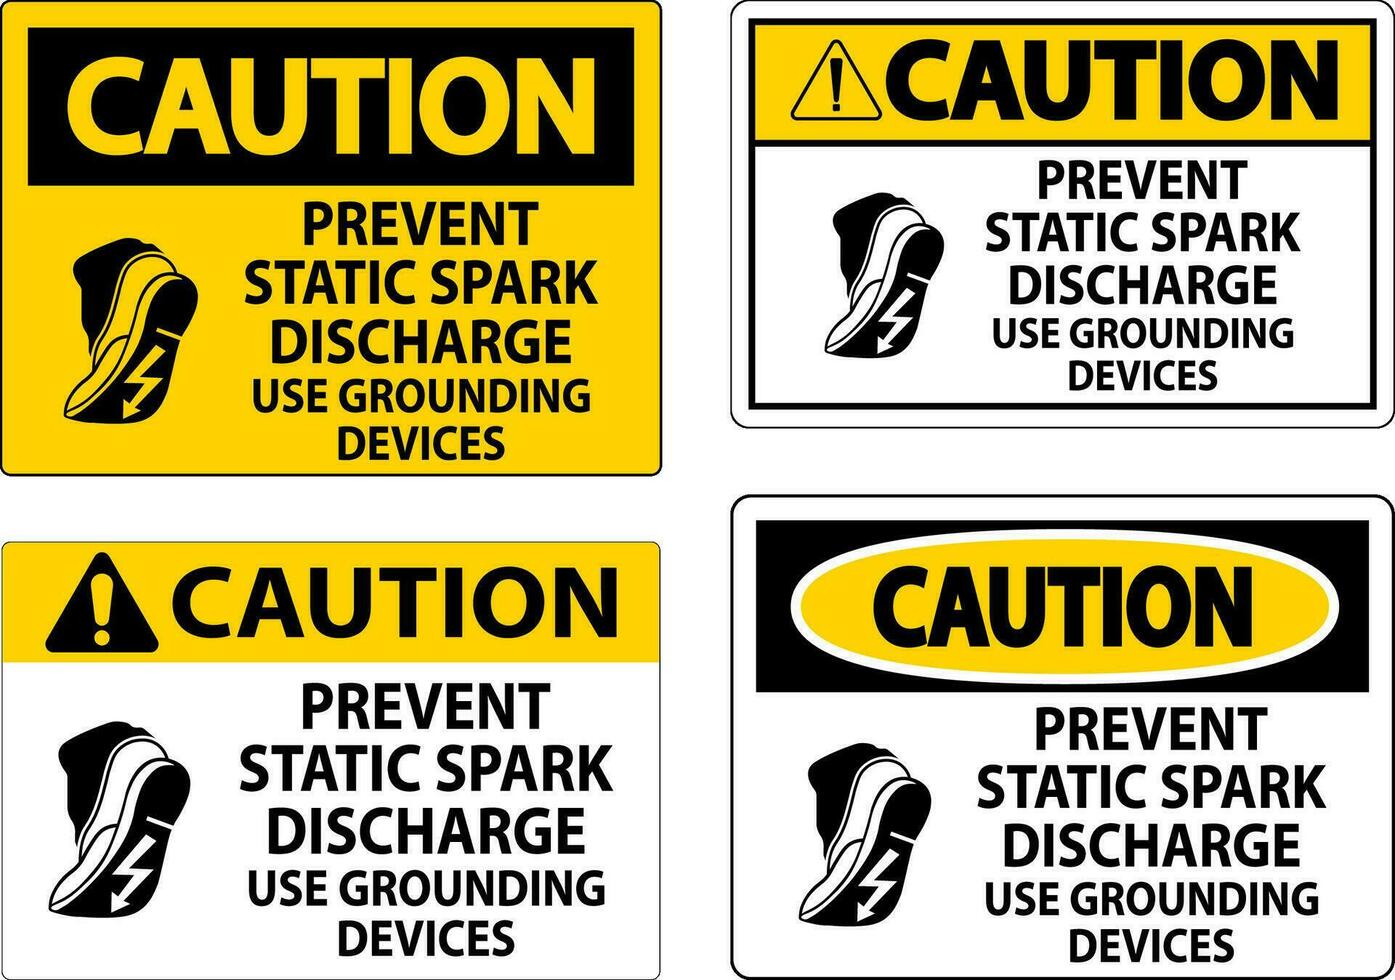 Caution Sign Prevent Static Spark Discharge, Use Grounding Devices vector